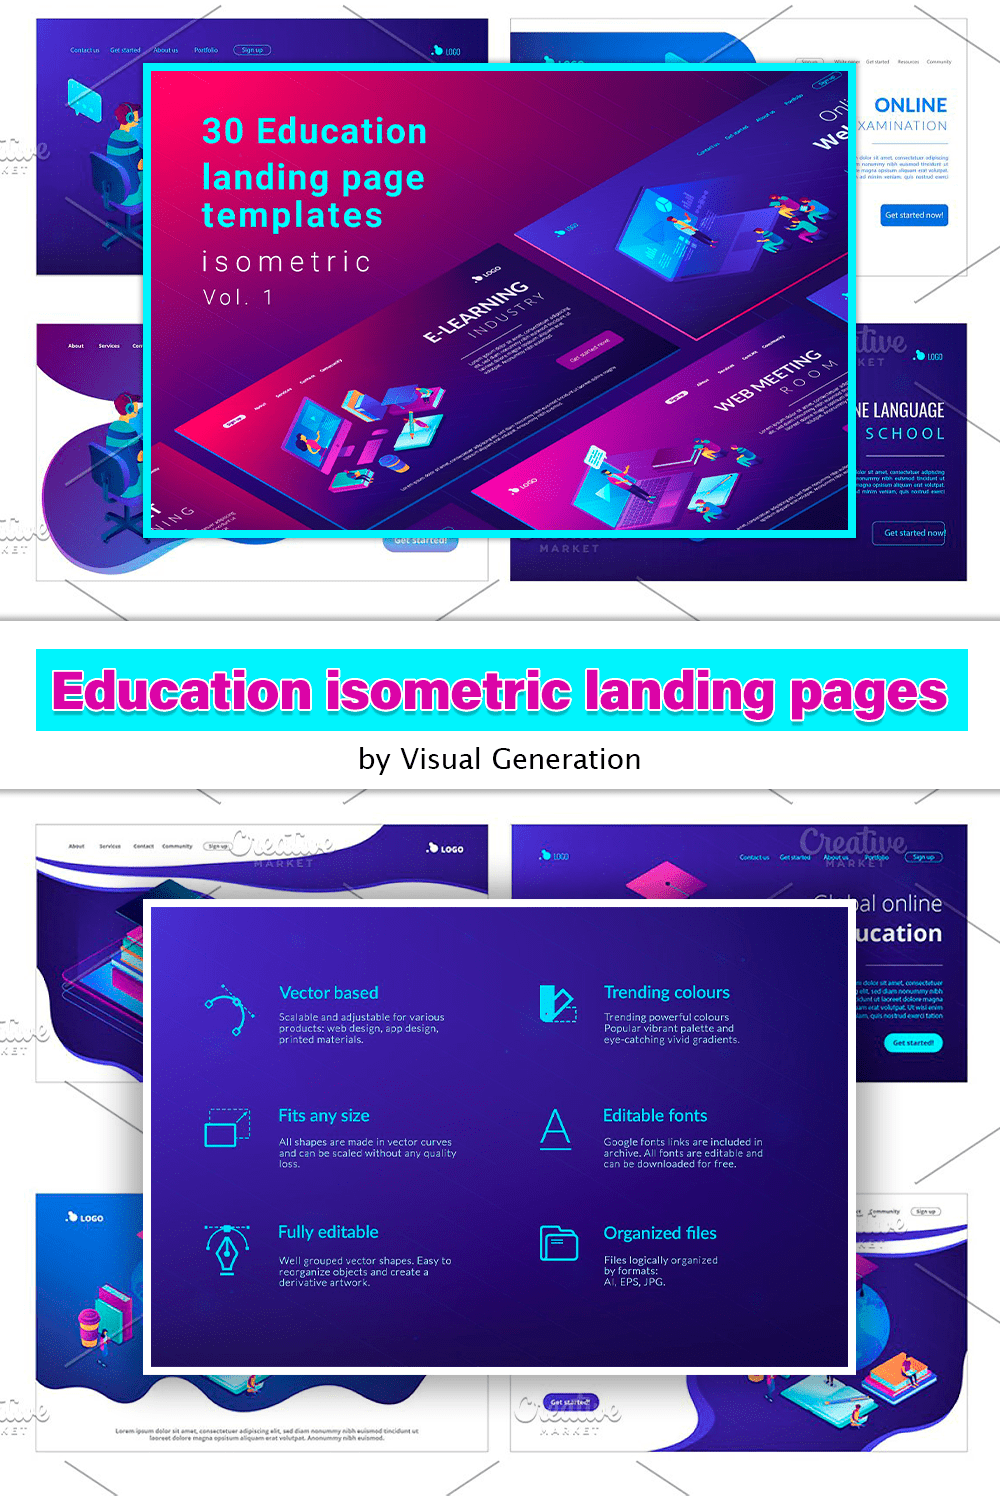 education isometric landing pages pinterest3